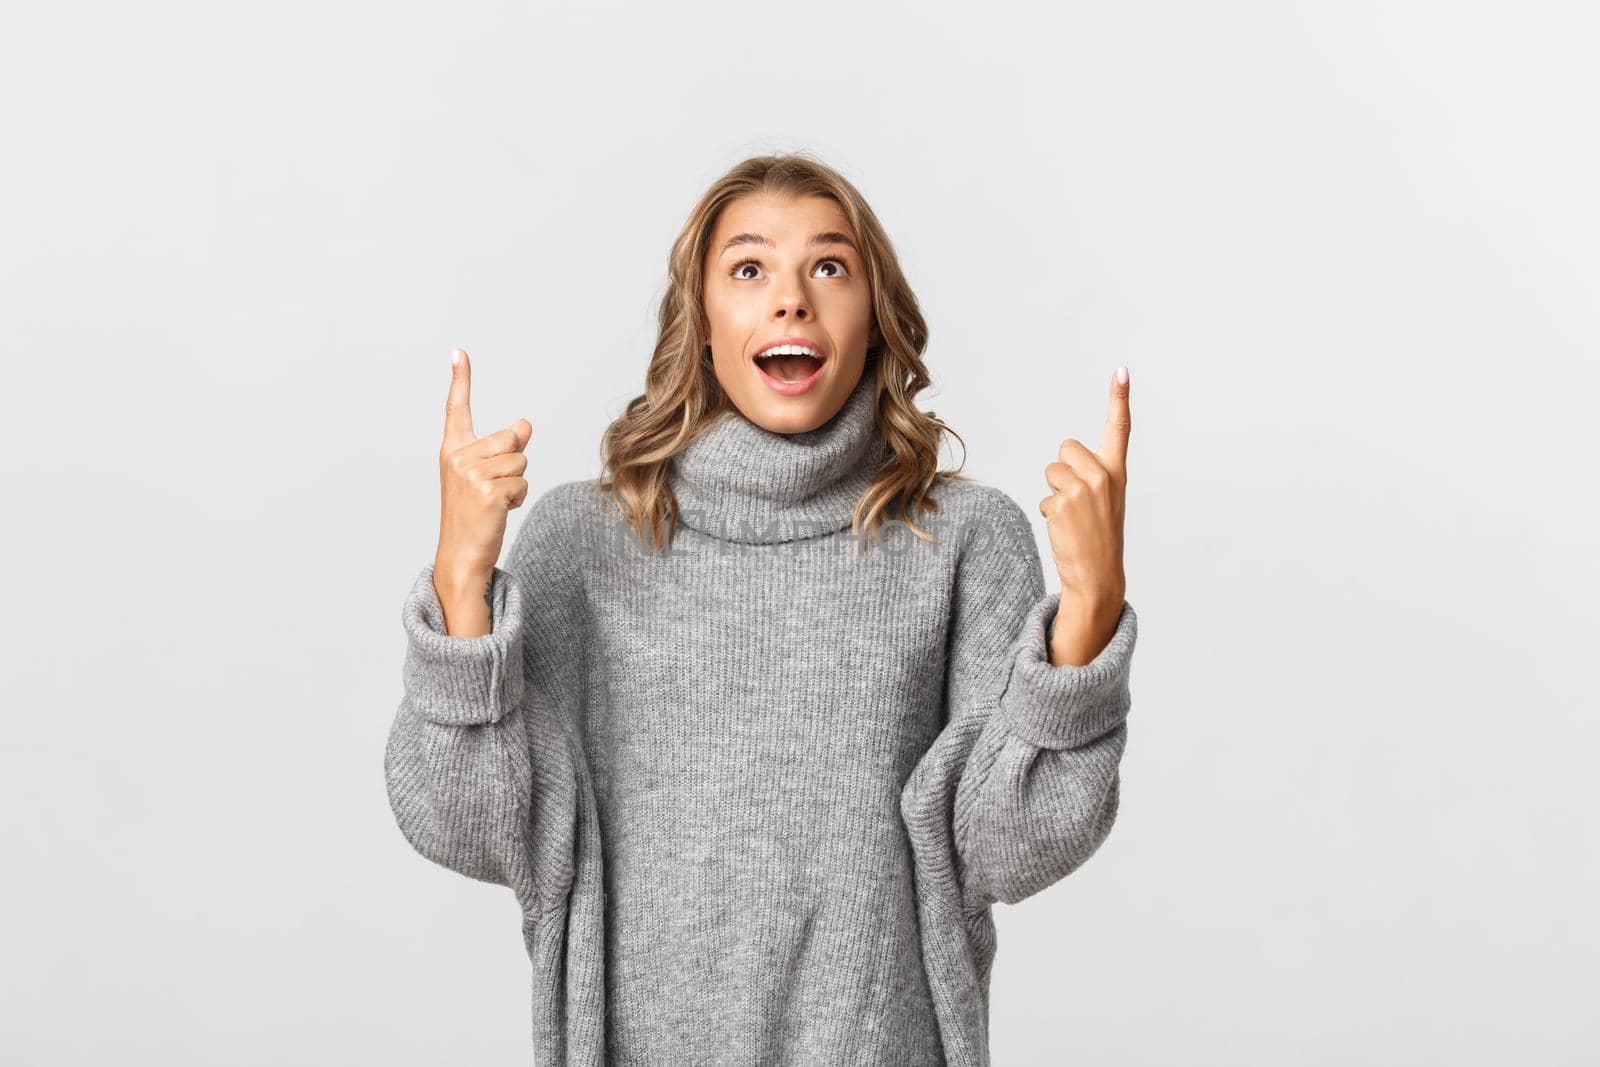 Image of surprised and happy blond girl, wearing grey sweater, pointing fingers up and looking fascinated, white background.